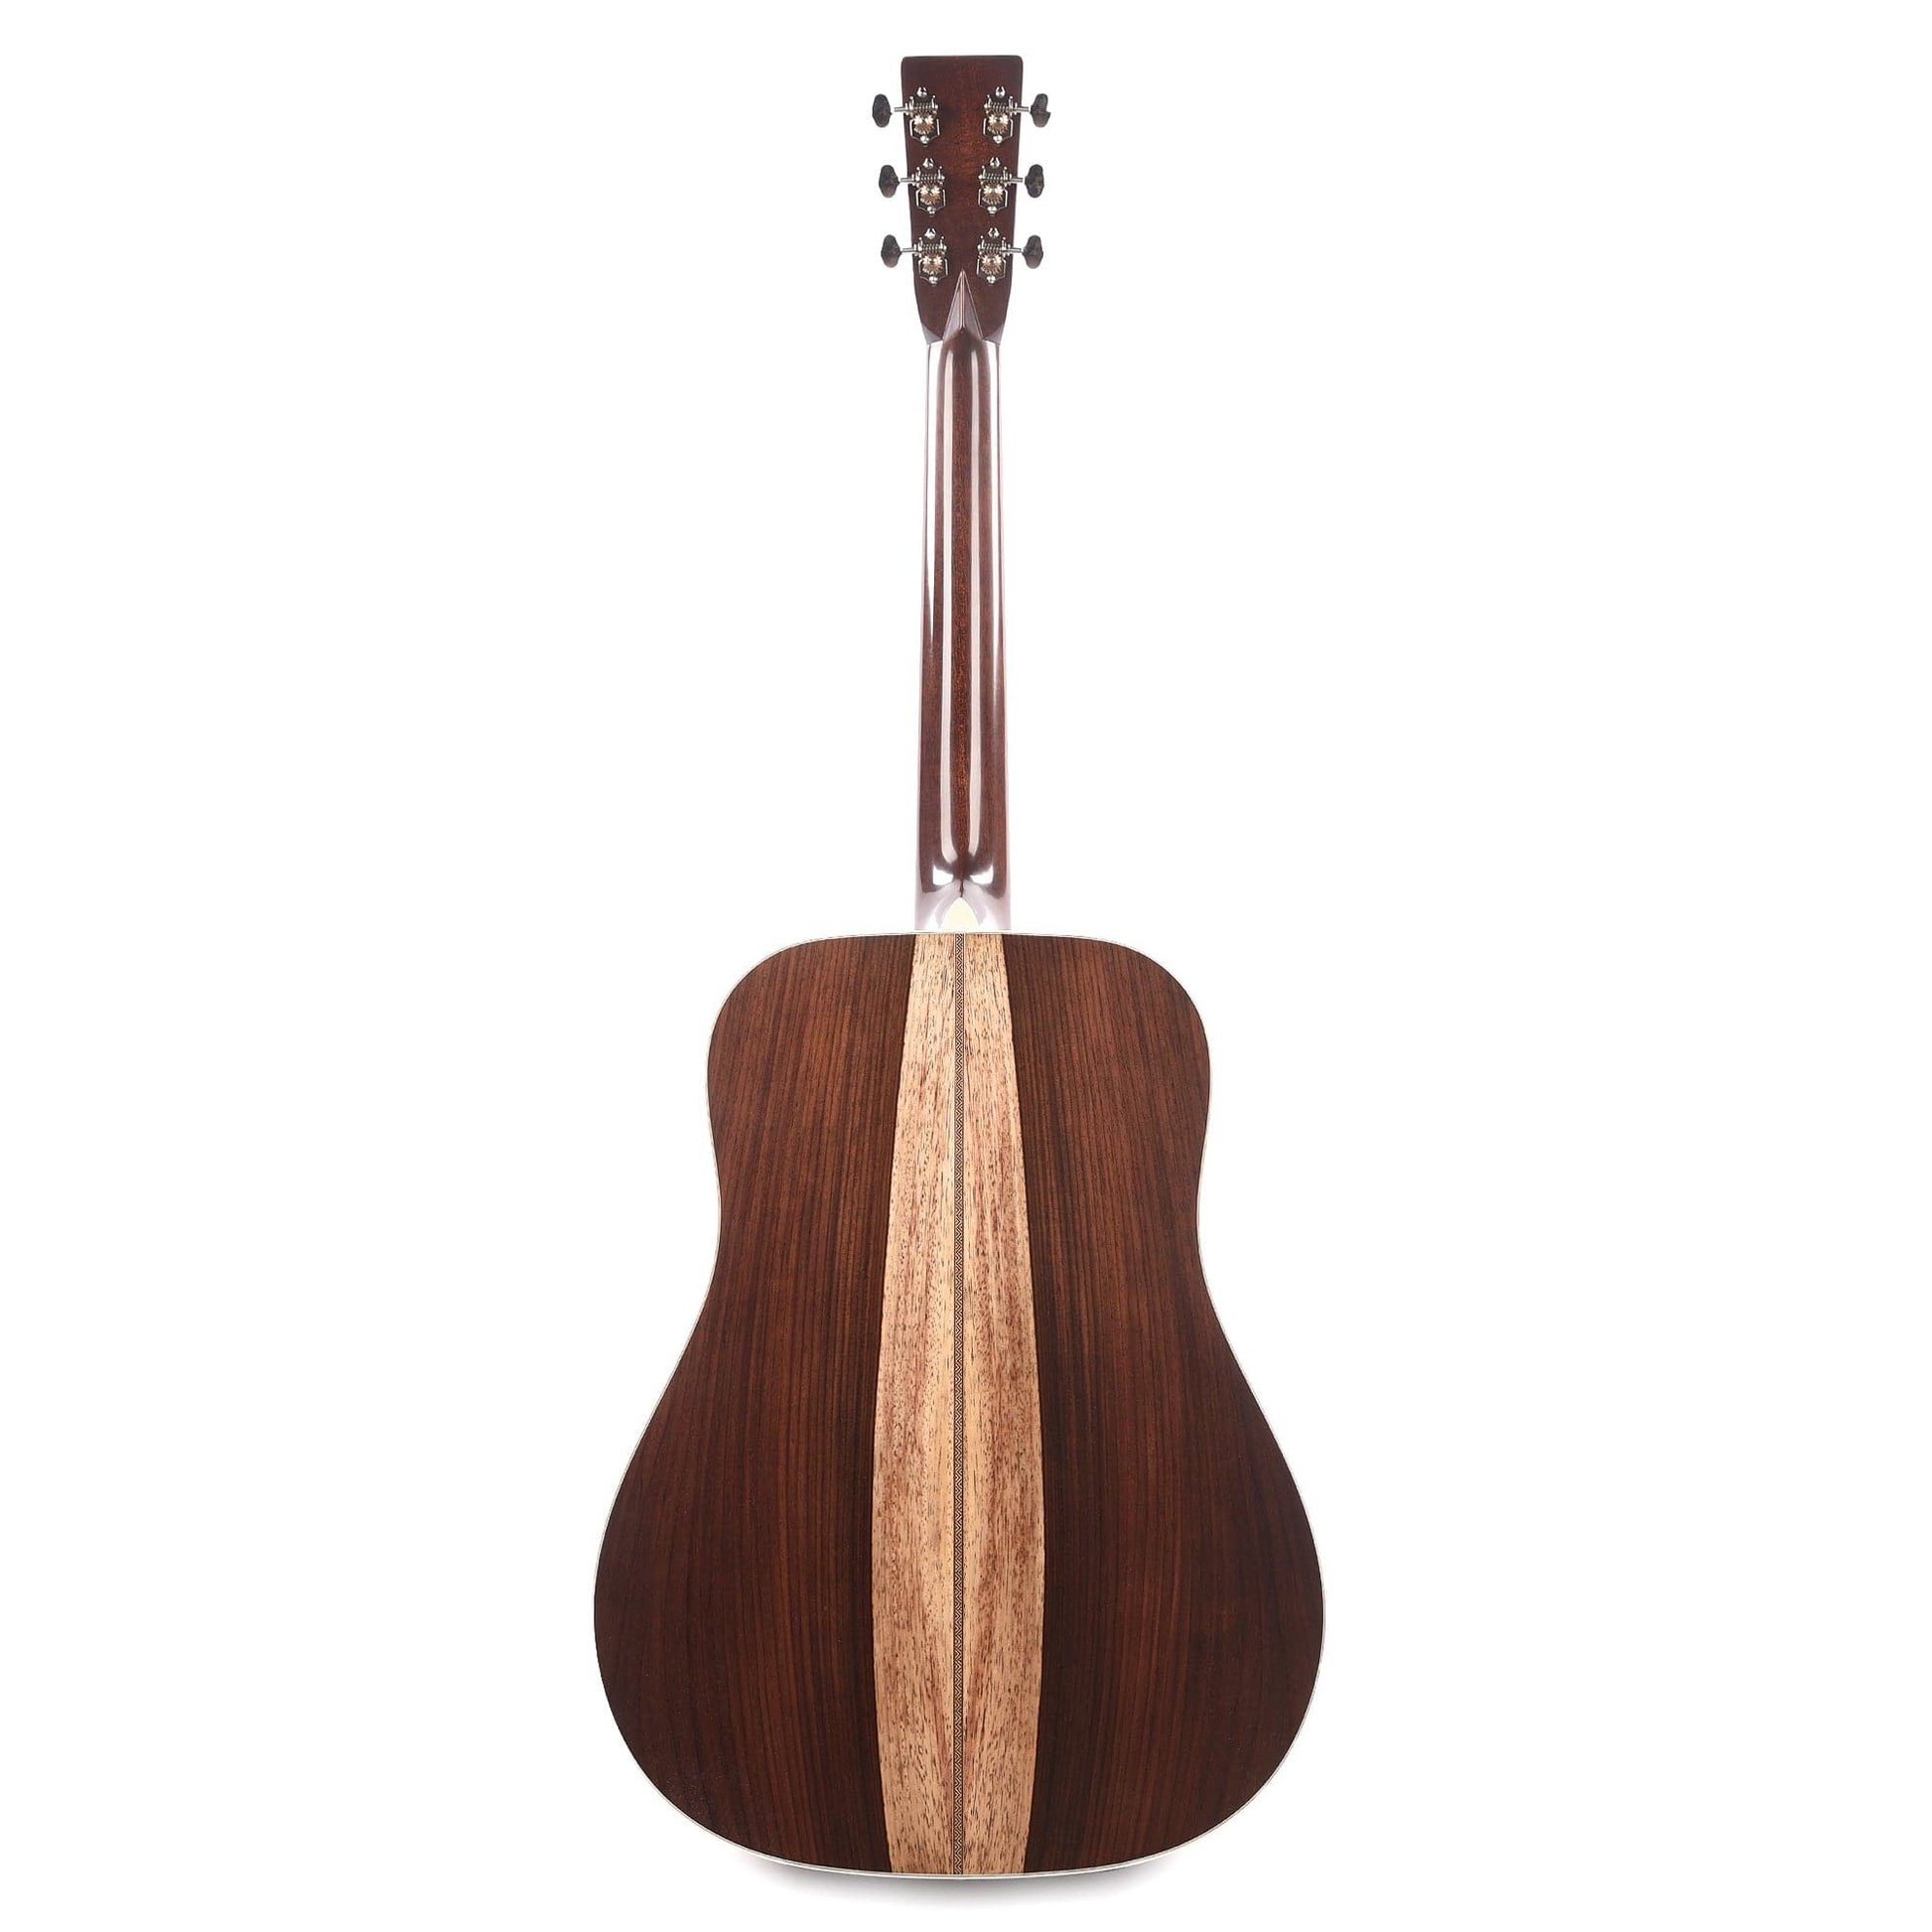 Martin Authentic D-28 1937 VTS Adirondack Spruce/Rosewood Natural Acoustic Guitars / Dreadnought